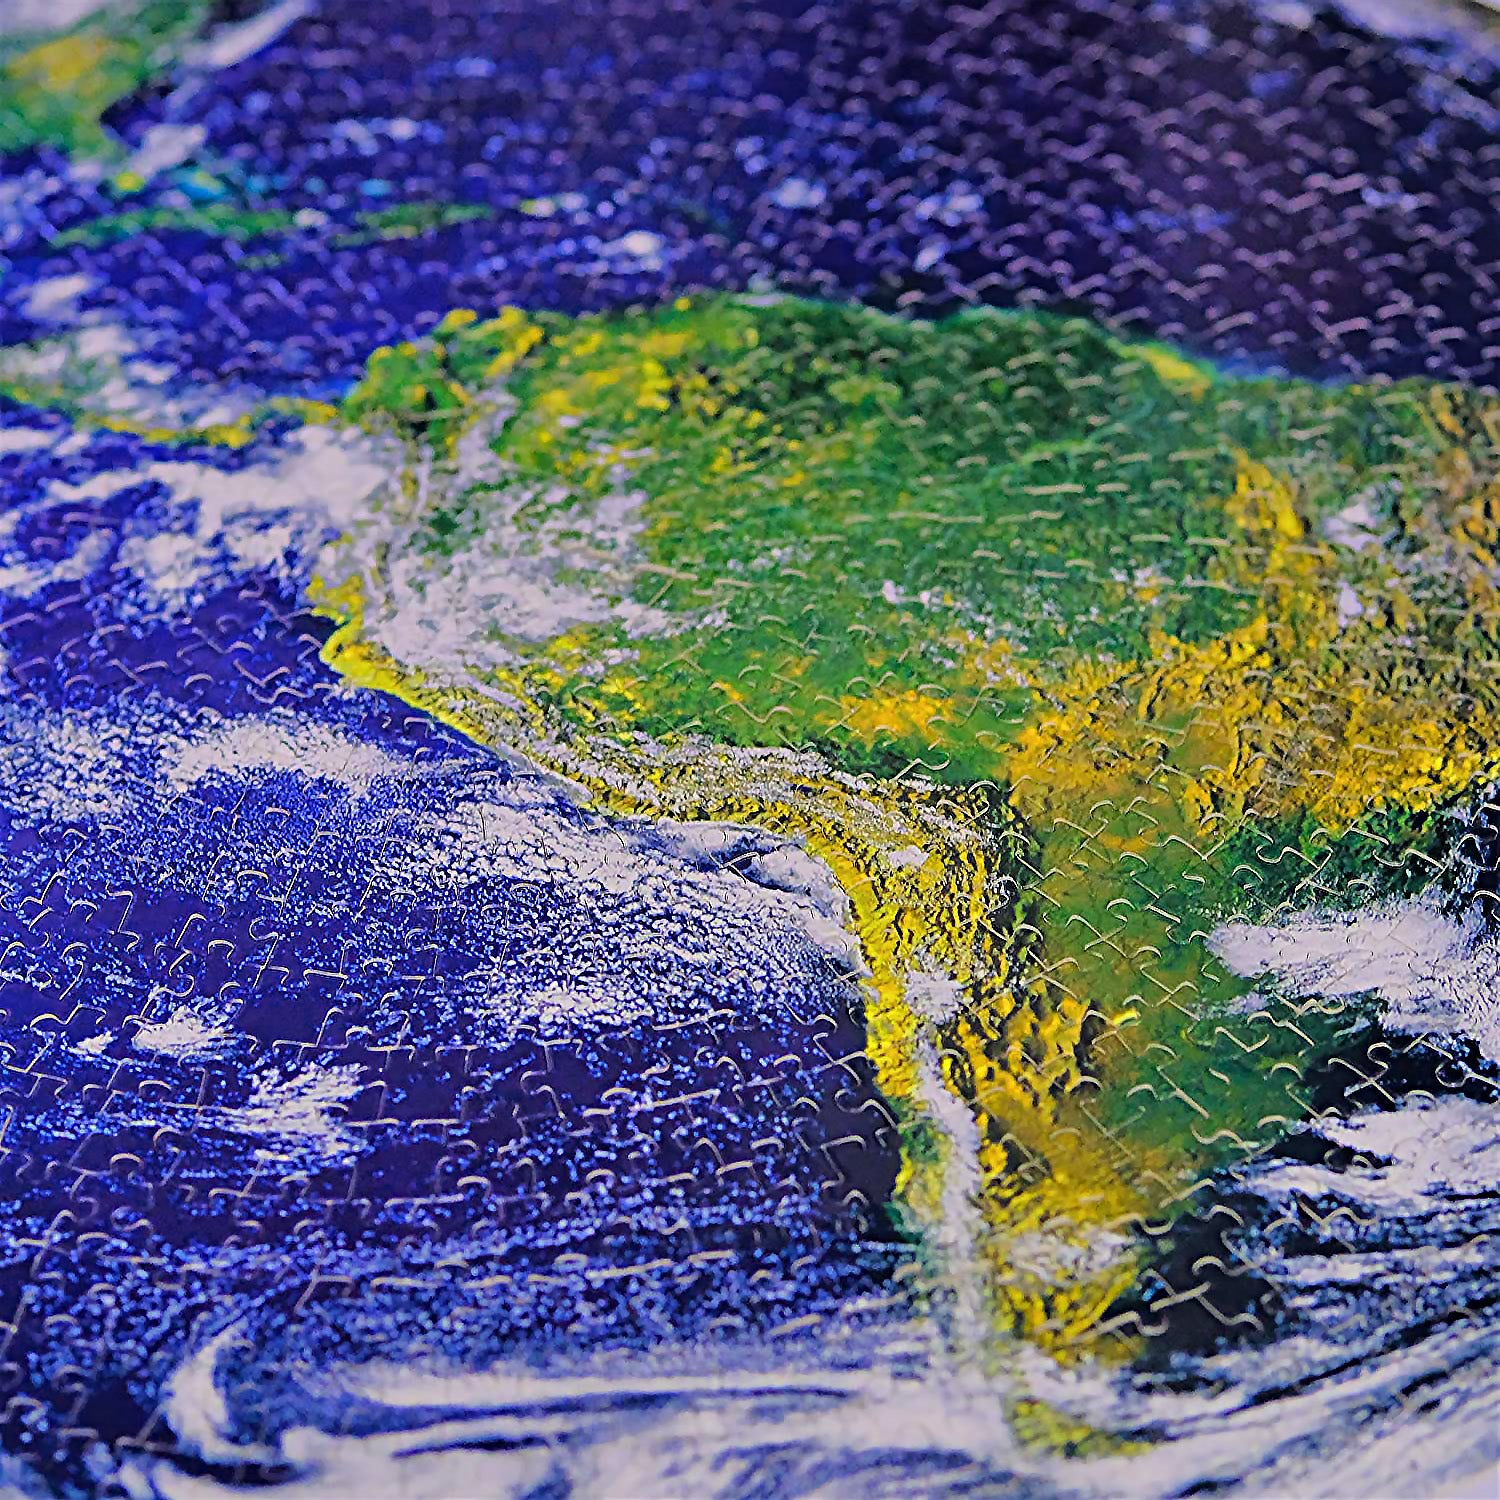 Rest In Pieces's 1000-piece circle-shaped Earth jigsaw puzzle is the perfect gift for Earth Day 2022.